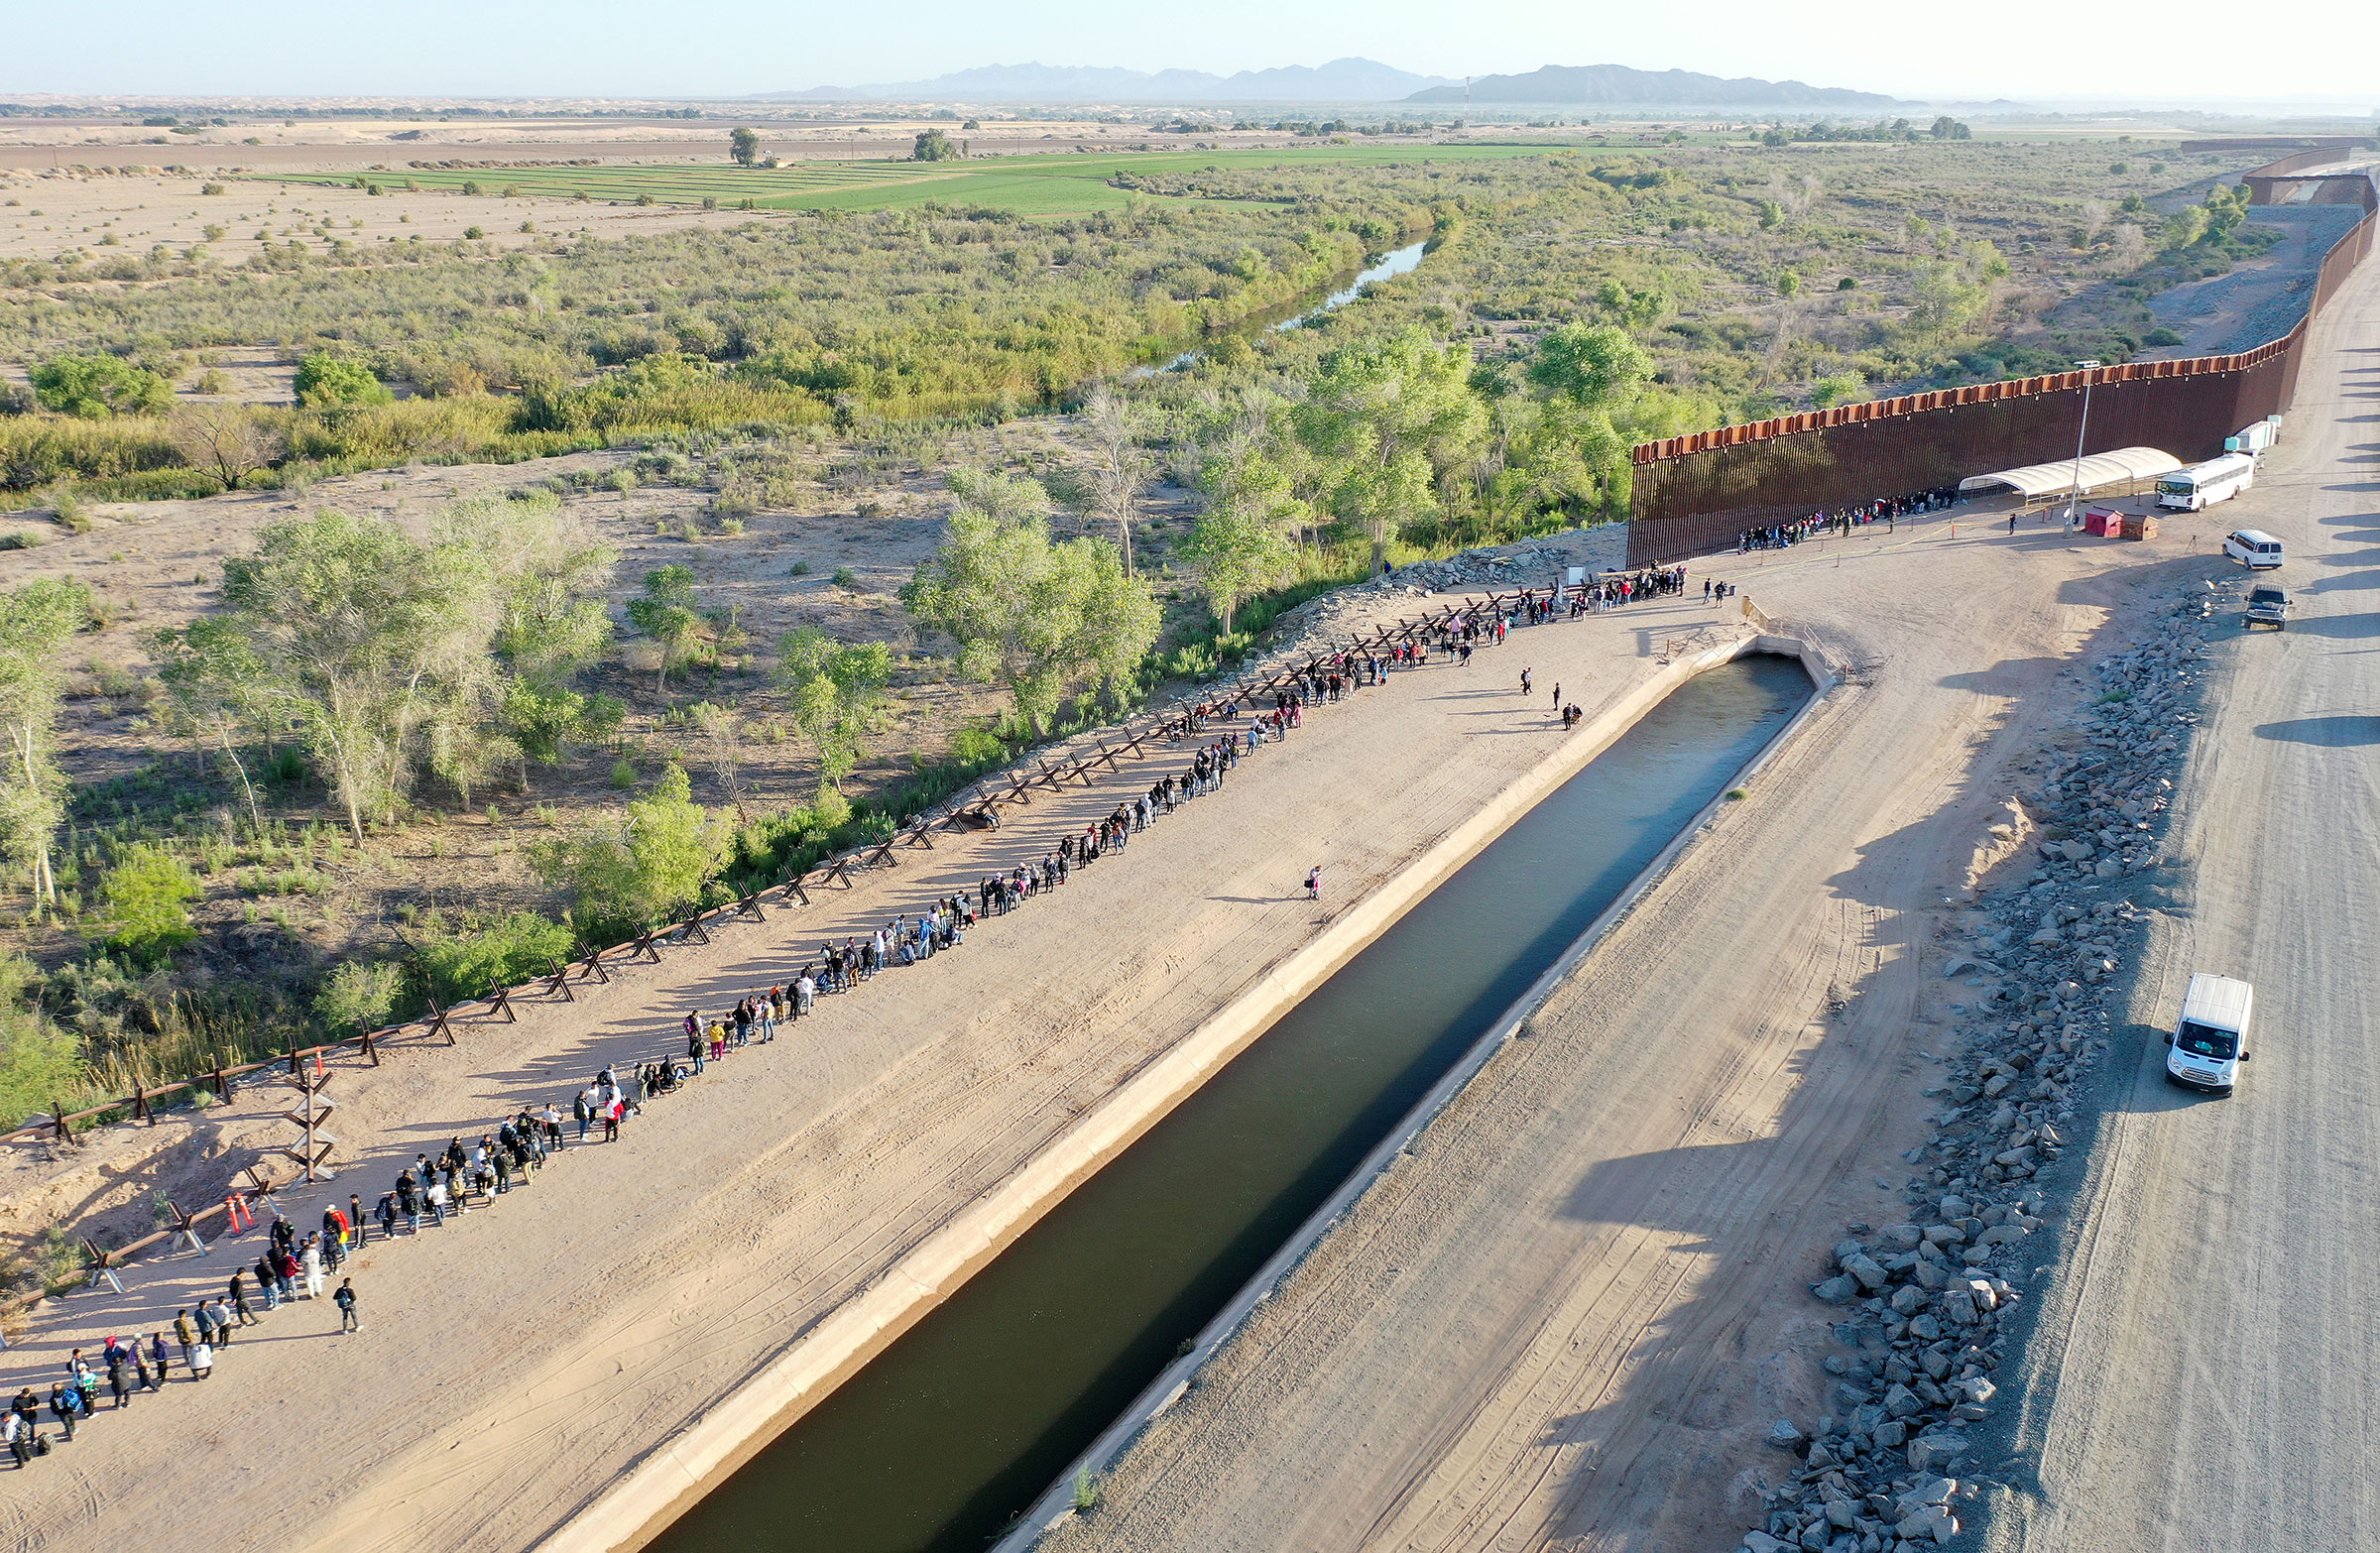 In an aerial view, immigrants seeking asylum in the United States wait in line near the border fence to be processed by U.S. Border Patrol agents after crossing into Arizona from Mexico in Yuma, Arizona, on May 11, 2023.